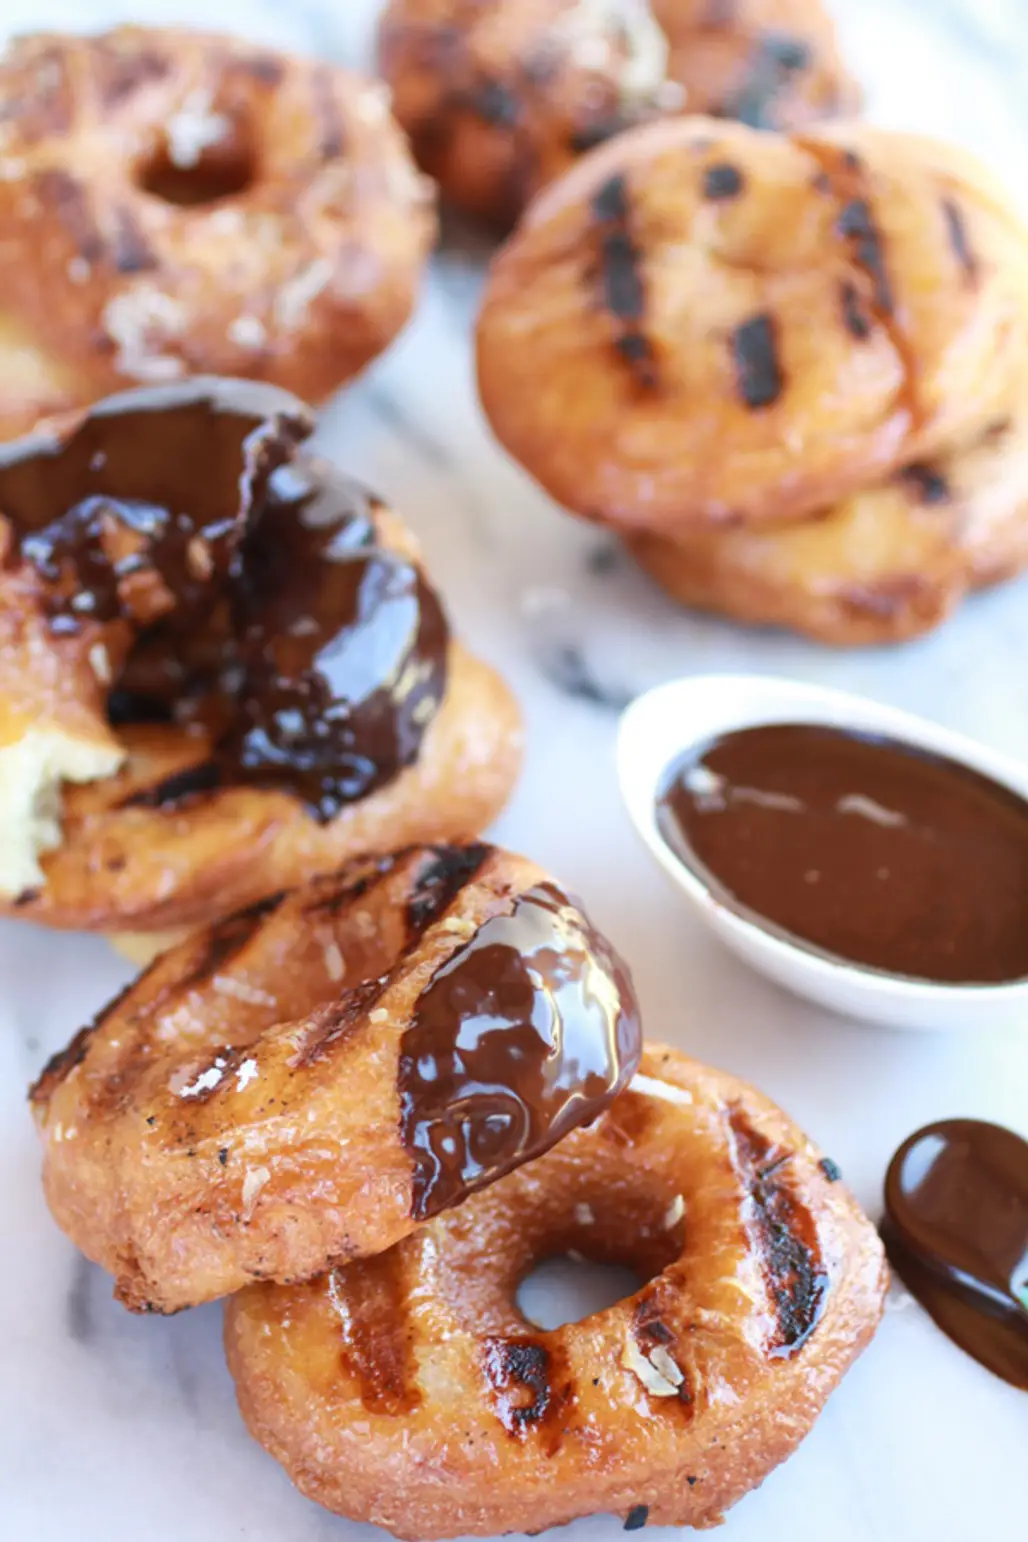 Grilled Doughnuts...